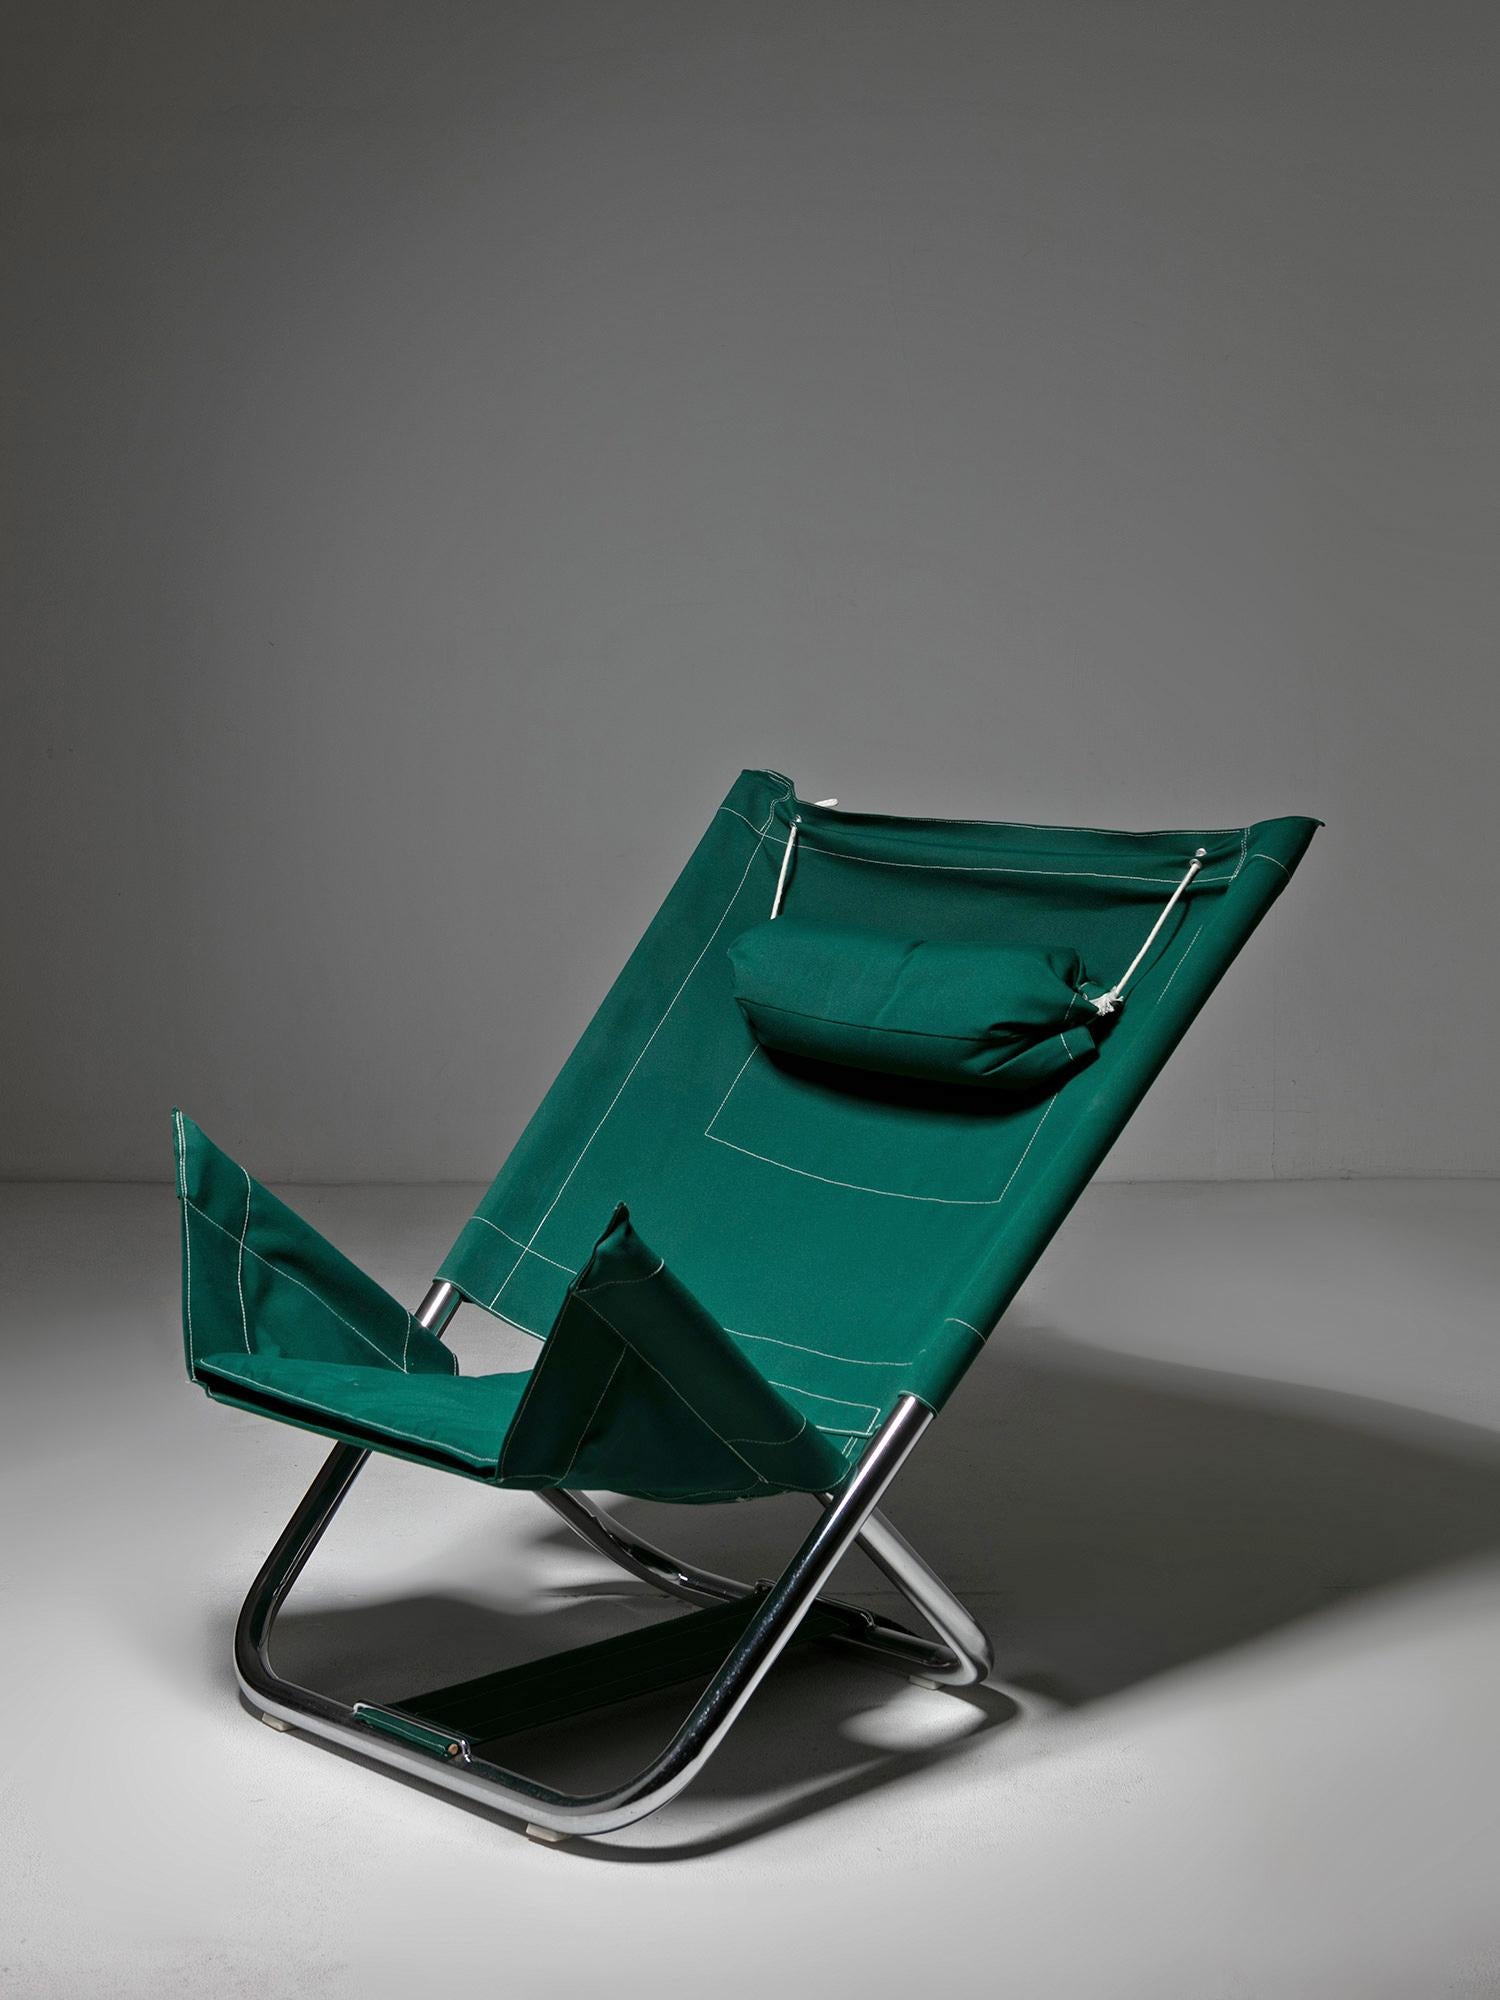 Folding armchair by Roberto Pamio and Renato Toso for Stilwood.
Tubular chrome frame and cozy seat with head-rest and large pocket on the back.